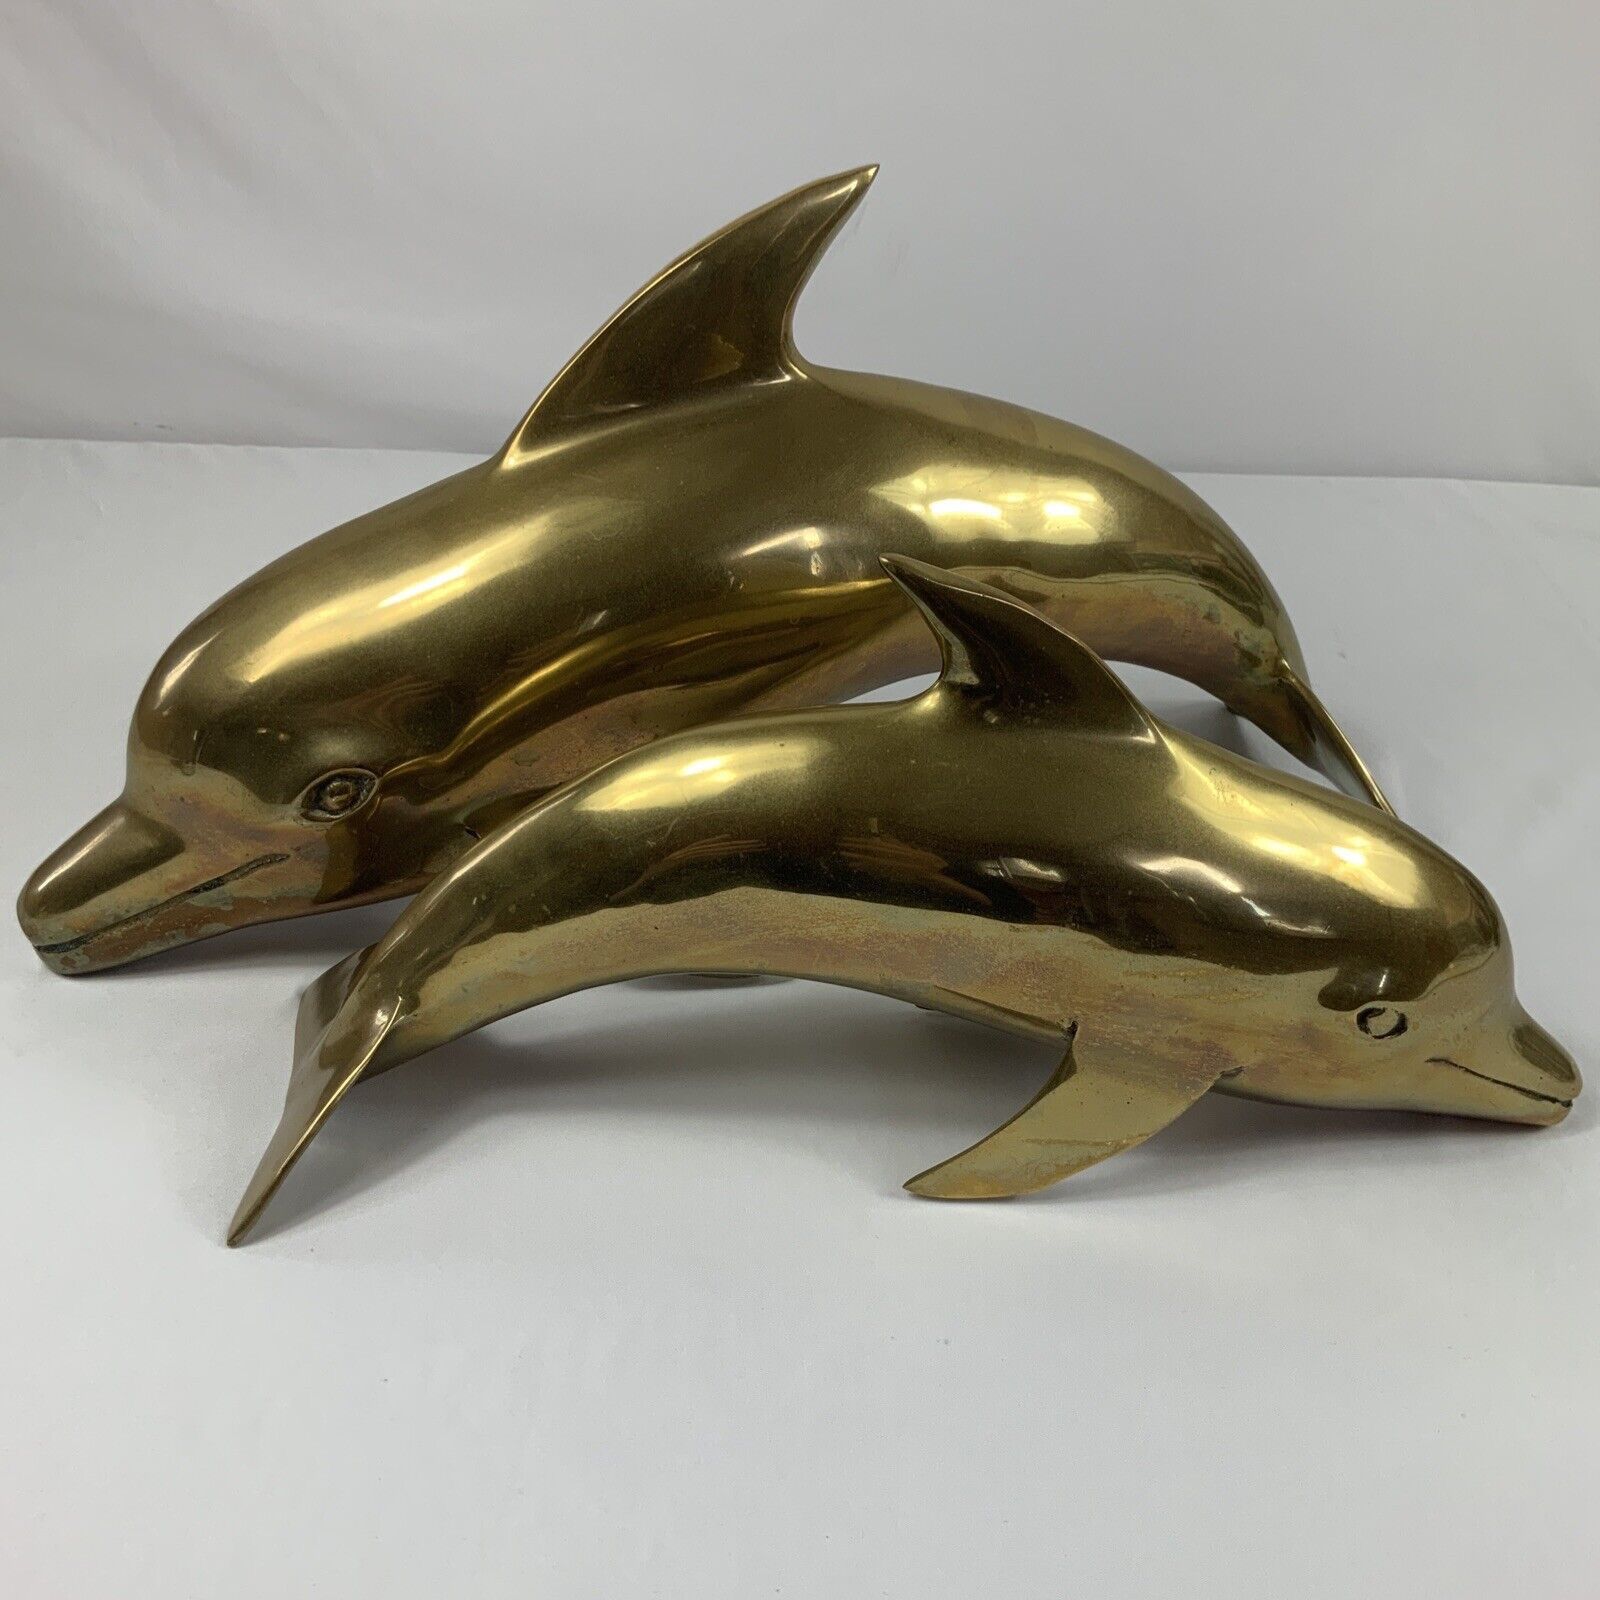 Vintage Heavy Brass Pair Of Dolphin Figurines Sculptures 17.5” And 13.5”